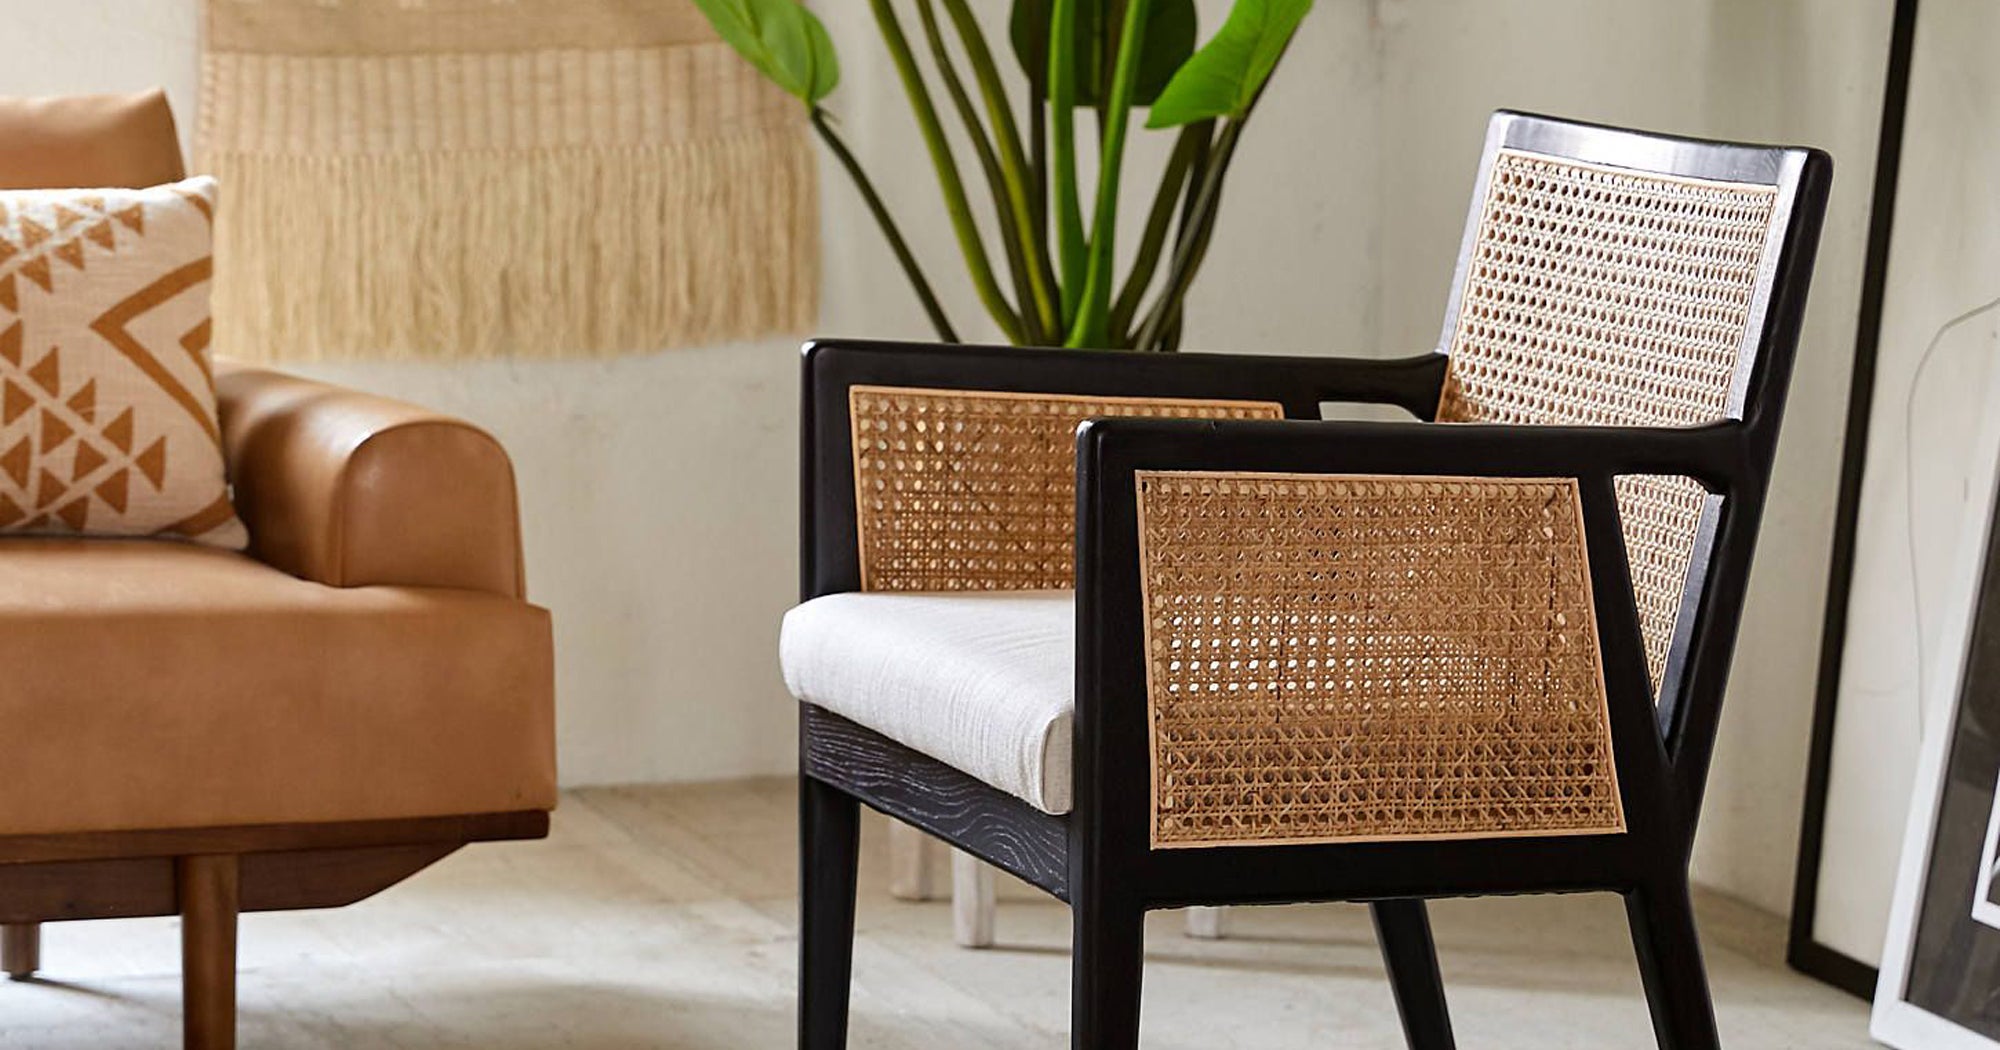 Where To Buy Cane Woven Chairs Mid-Century Trend